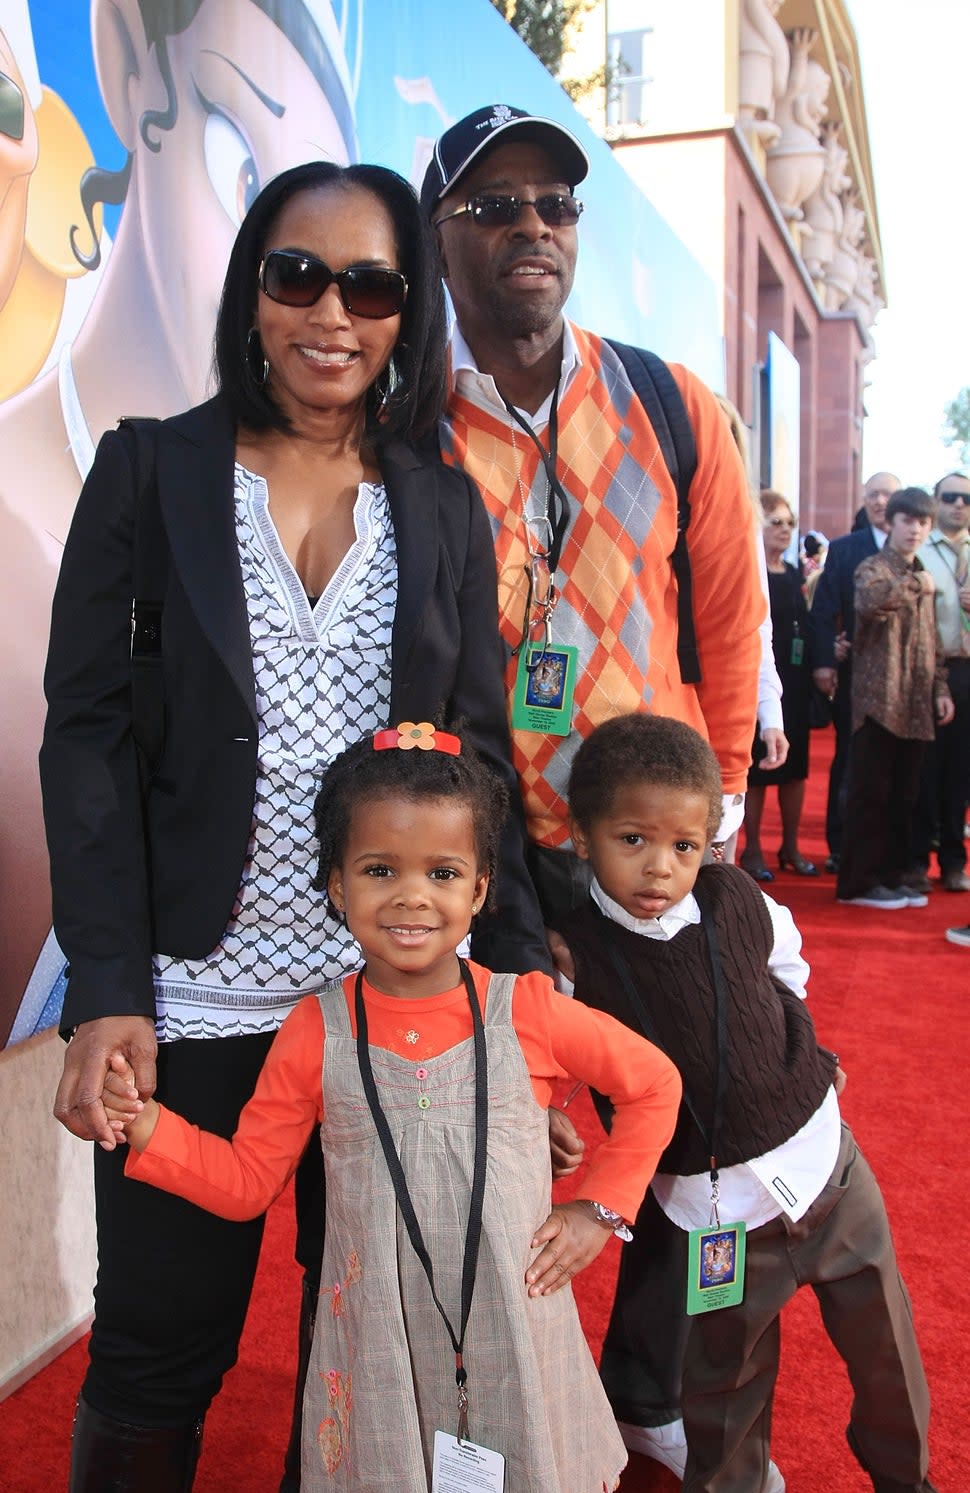 Angela Bassett and Courtney B. Vance with Bronwyn Golden and Slater Josiah